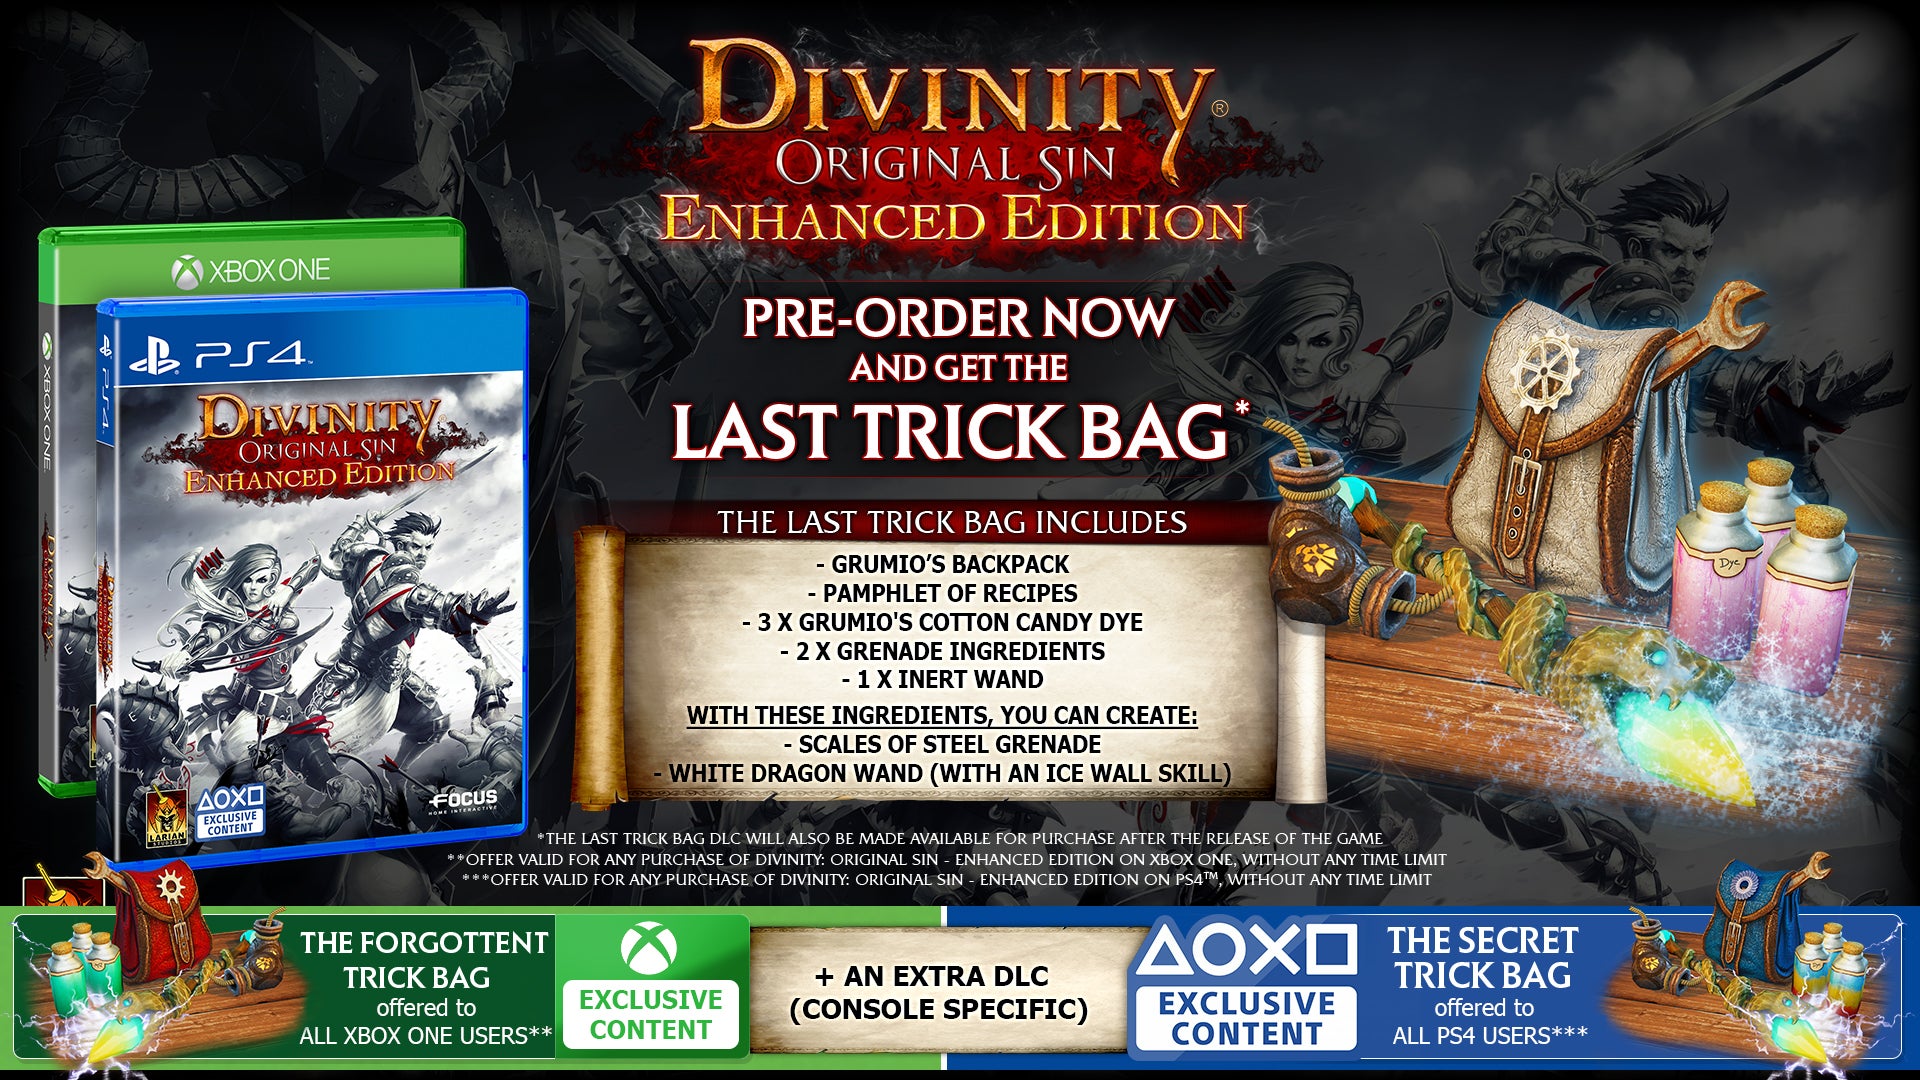 Image for Divinity: Original Sin Enhanced Edition pre-order goodies announced